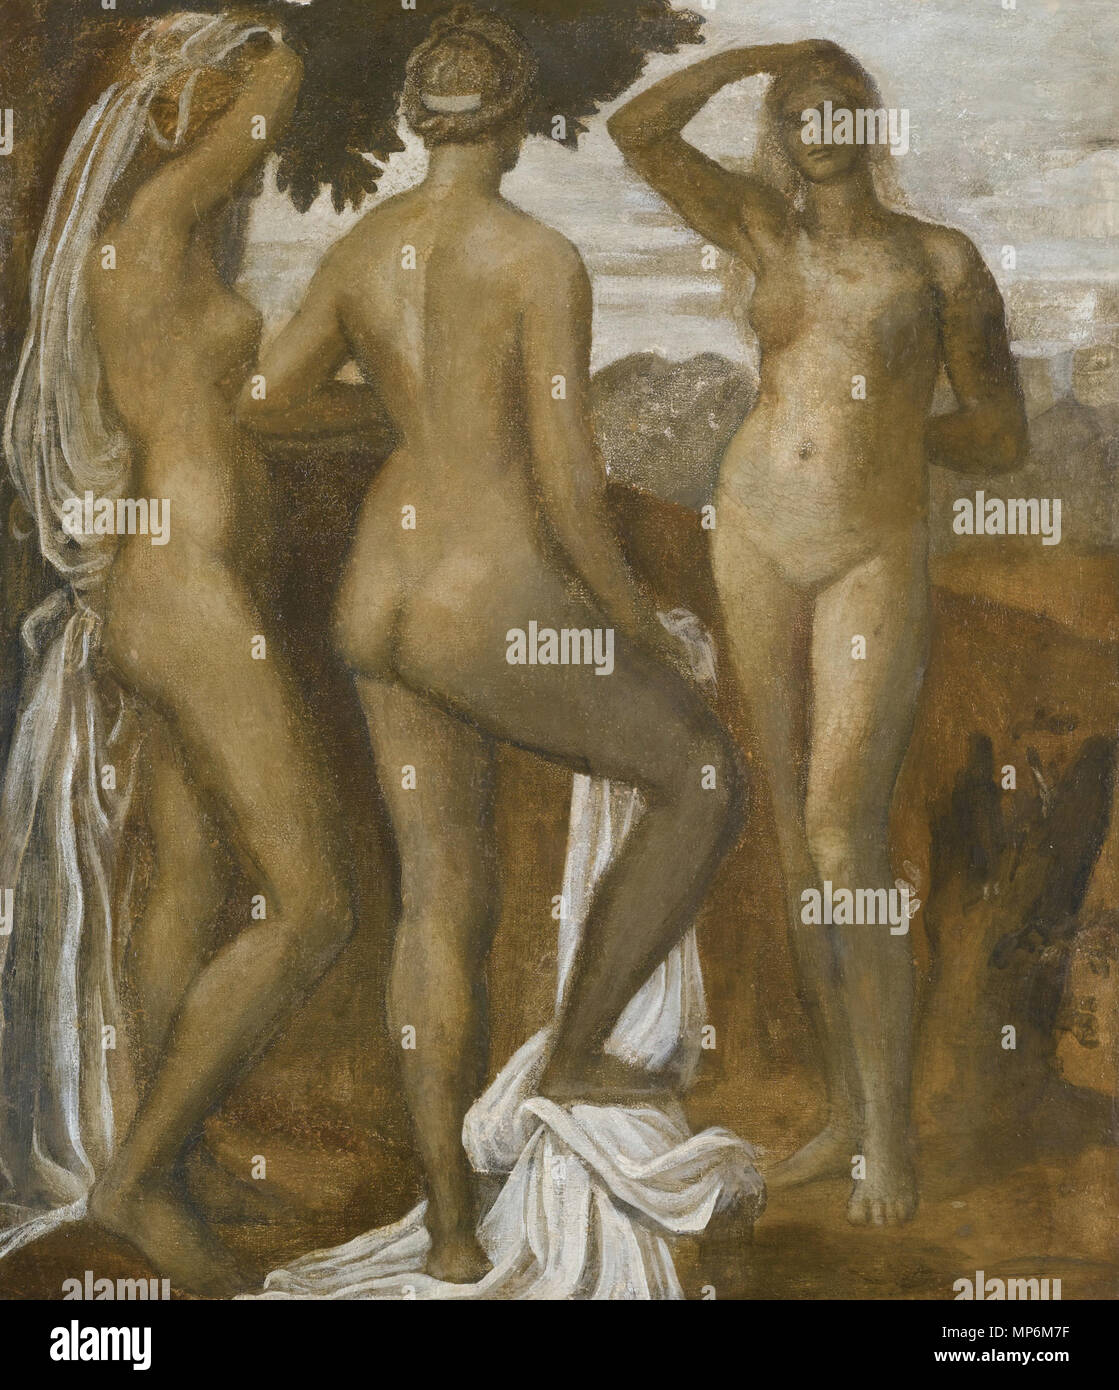 The three graces (The three goddesses) (The judgement of Paris) *oil on canvas *76 x 66 cm    .  English: The Judgement of Paris Français : Le Jugement de Pâris . 4 February 2007 (original upload date).    George Frederic Watts  (1817–1904)      Description British painter and sculptor  Date of birth/death 23 February 1817 1 June 1904  Location of birth/death London Limnerslease bei Compton (Surrey)  Work location London, Florence, Paris, Konstantinopel  Authority control  : Q183245 VIAF: 10095477 ISNI: 0000 0000 8076 3251 ULAN: 500026988 LCCN: n50043705 NLA: 35594706 WorldCat    Original uplo Stock Photo